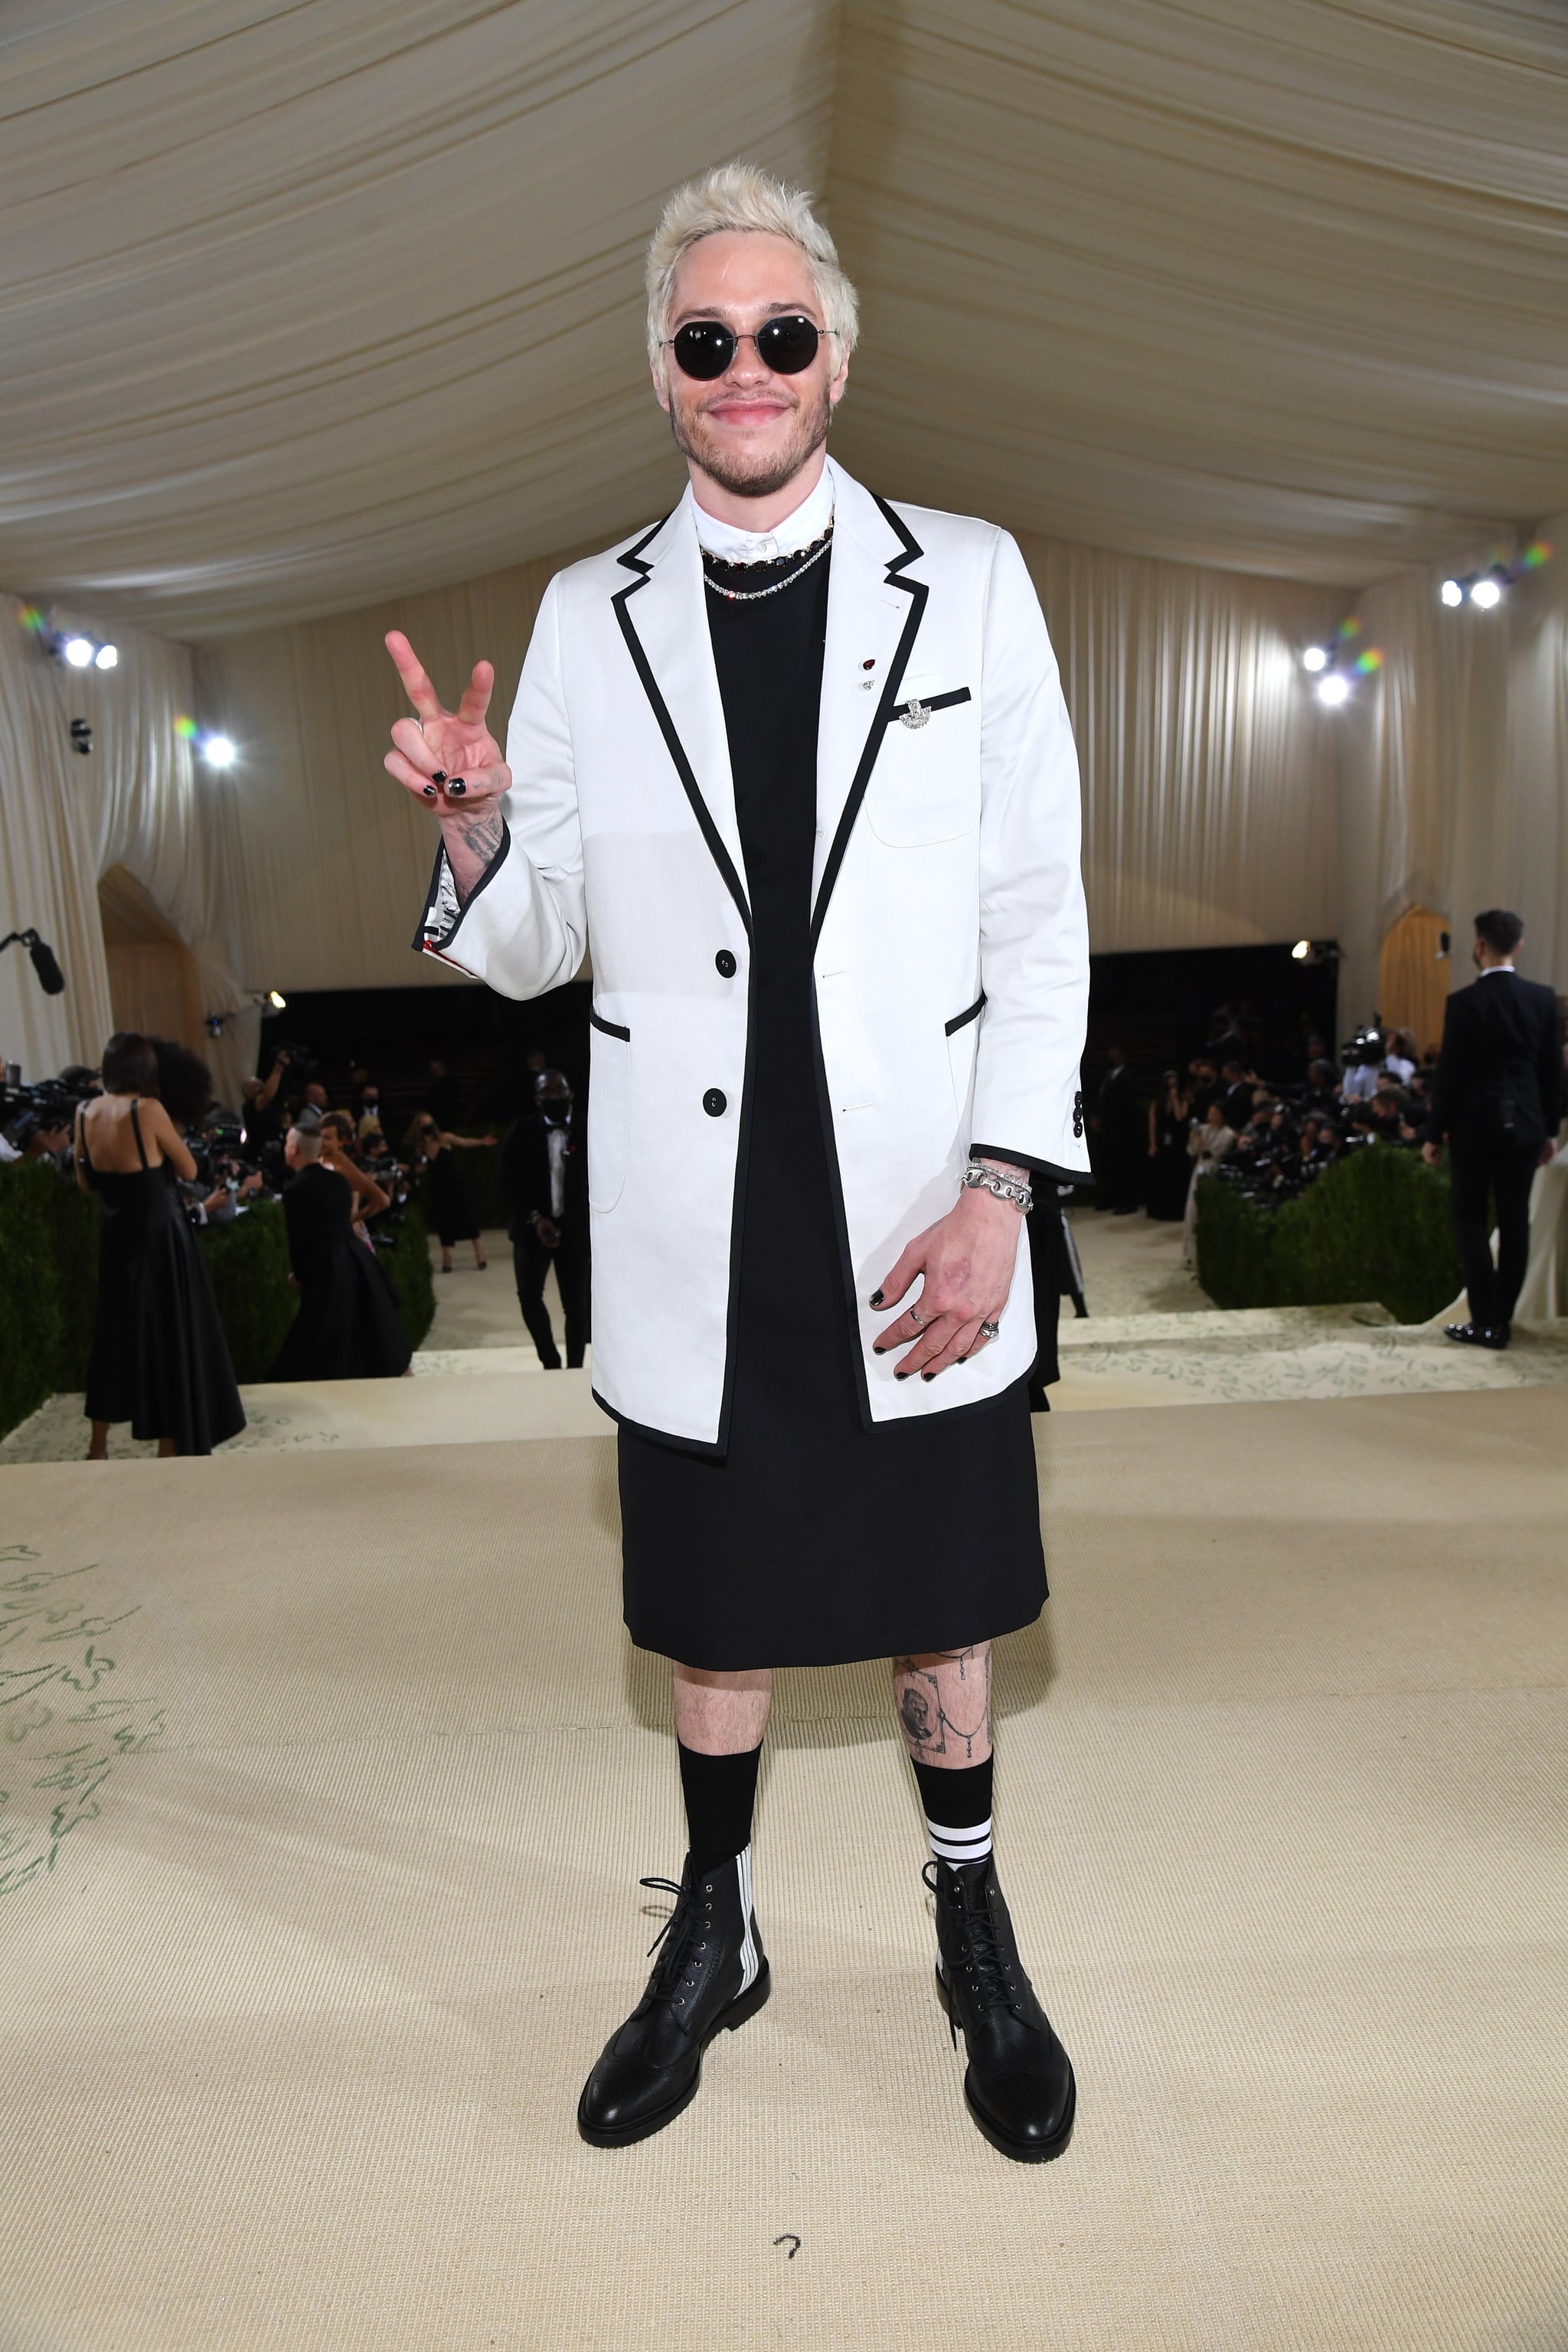 NEW YORK, NEW YORK - SEPTEMBER 13: Pete Davidson attends The 2021 Met Gala Celebrating In America: A Lexicon Of Fashion at Metropolitan Museum of Art on September 13, 2021 in New York City. (Photo by Kevin Mazur/MG21/Getty Images For The Met Museum/Vogue)